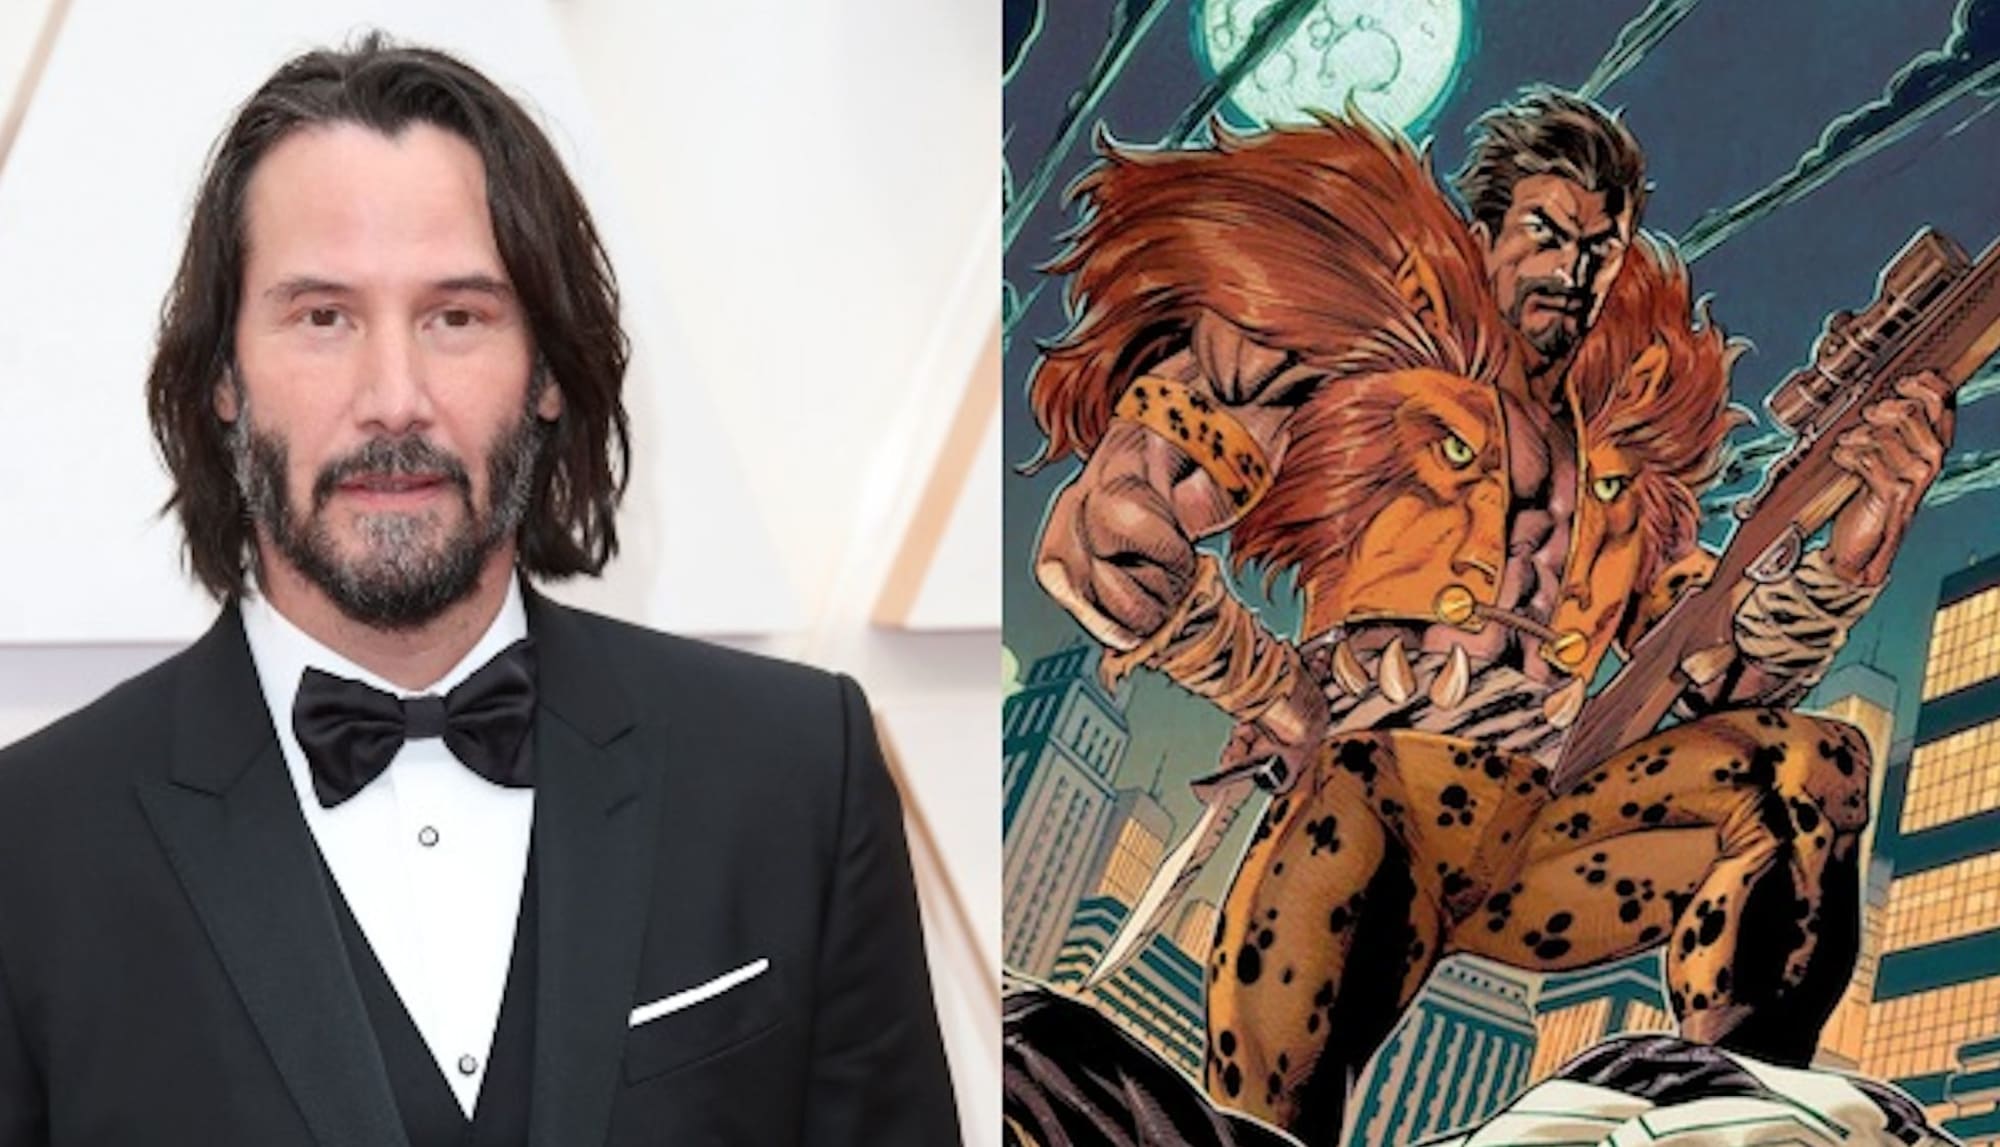 Rumor: Sony offers Keanu Reeves the role of Kraven the Hunter